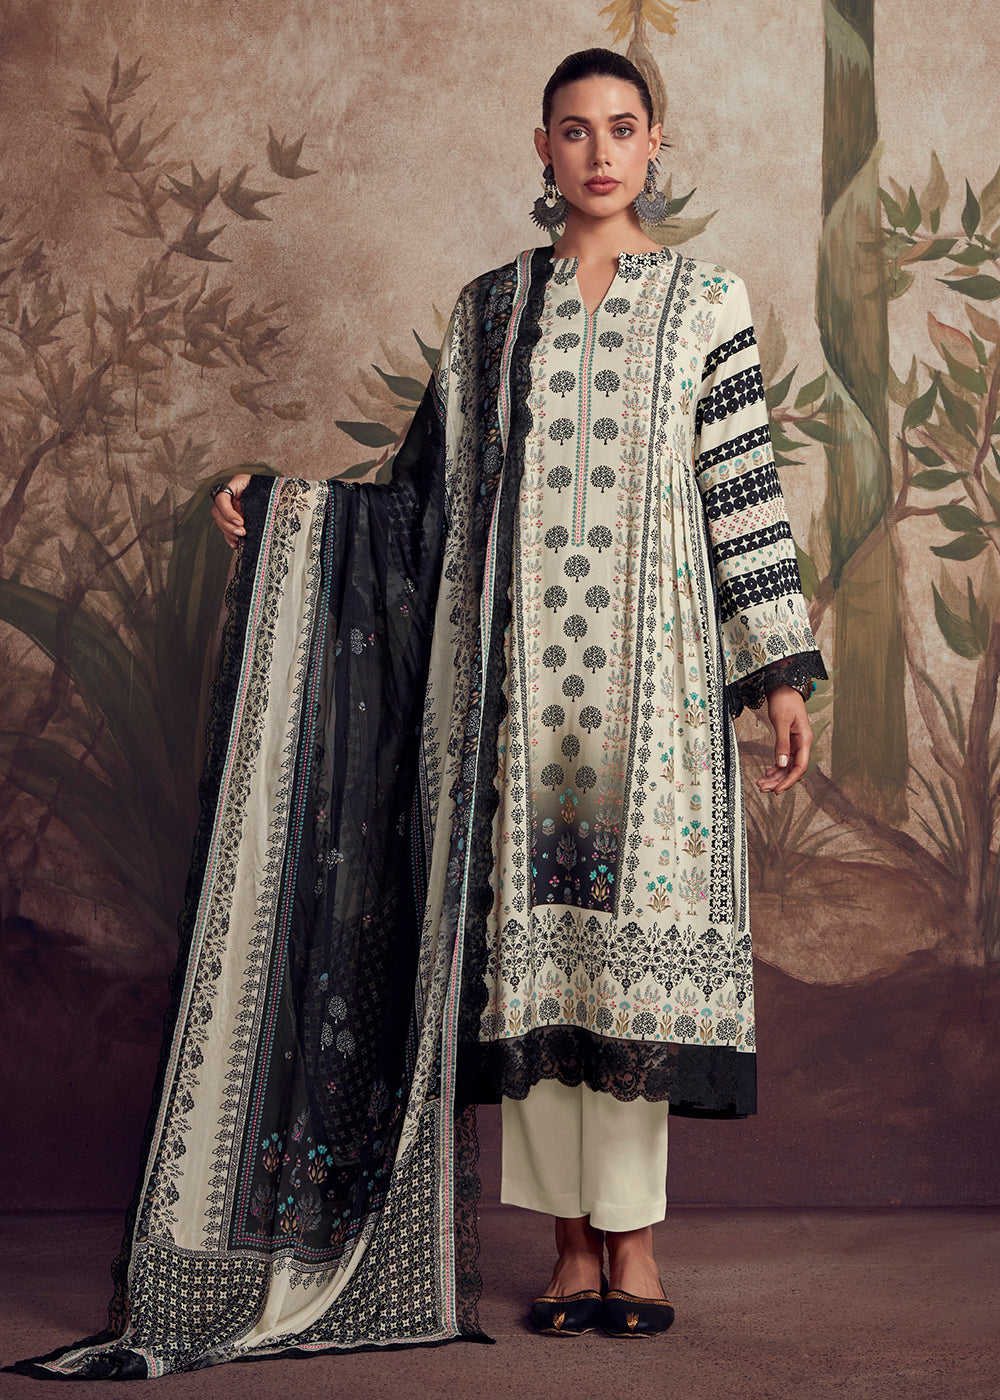 Buy Now Off White Digital Printed Pakistani Style Salwar Suit Online in USA, UK, Canada, Germany, Australia & Worldwide at Empress Clothing. 